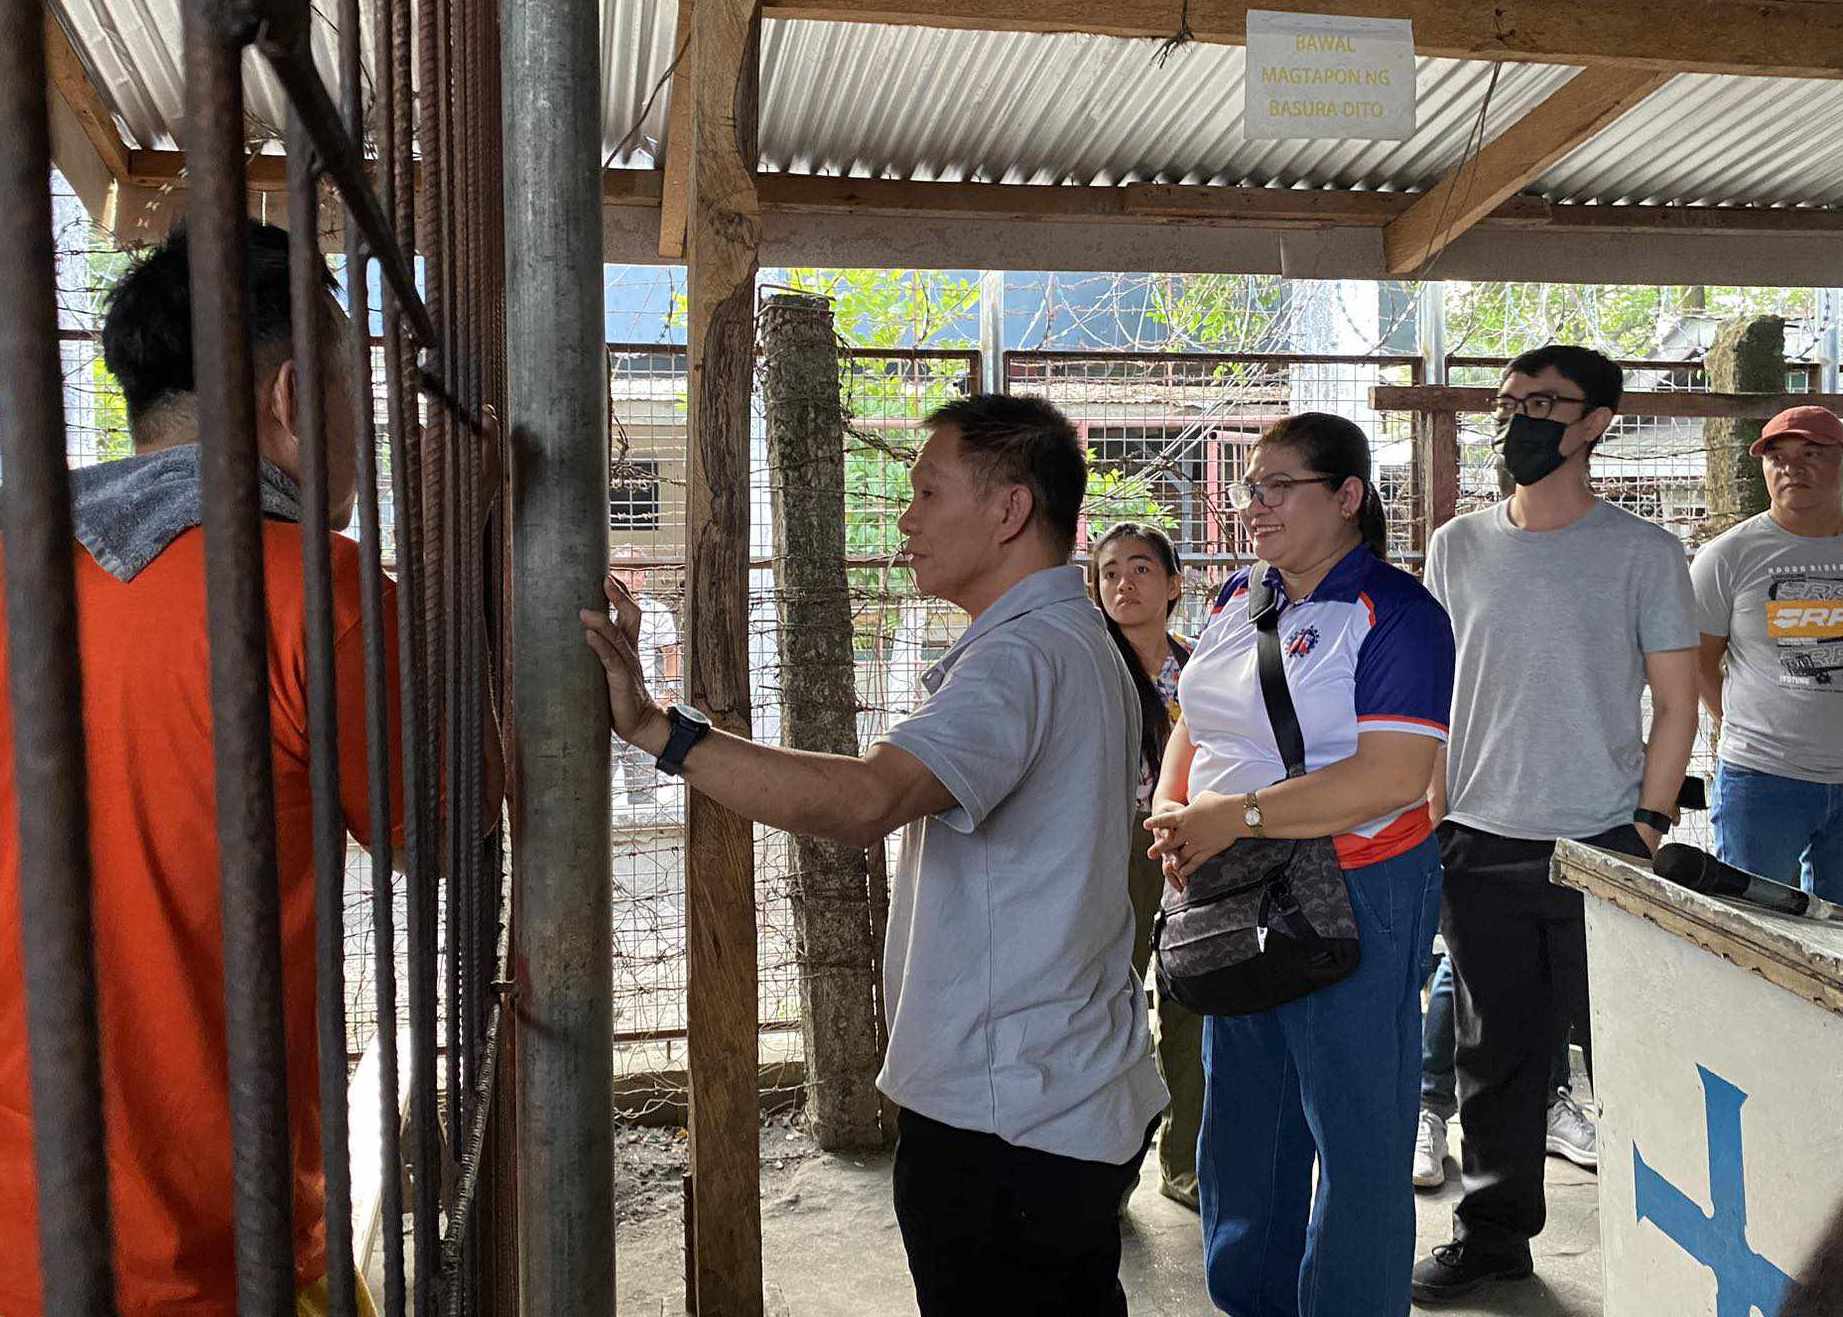 DPWH engineers distribute iftar meals, water bottles and fruits to 148 inmates in Sultan Kudarat prison